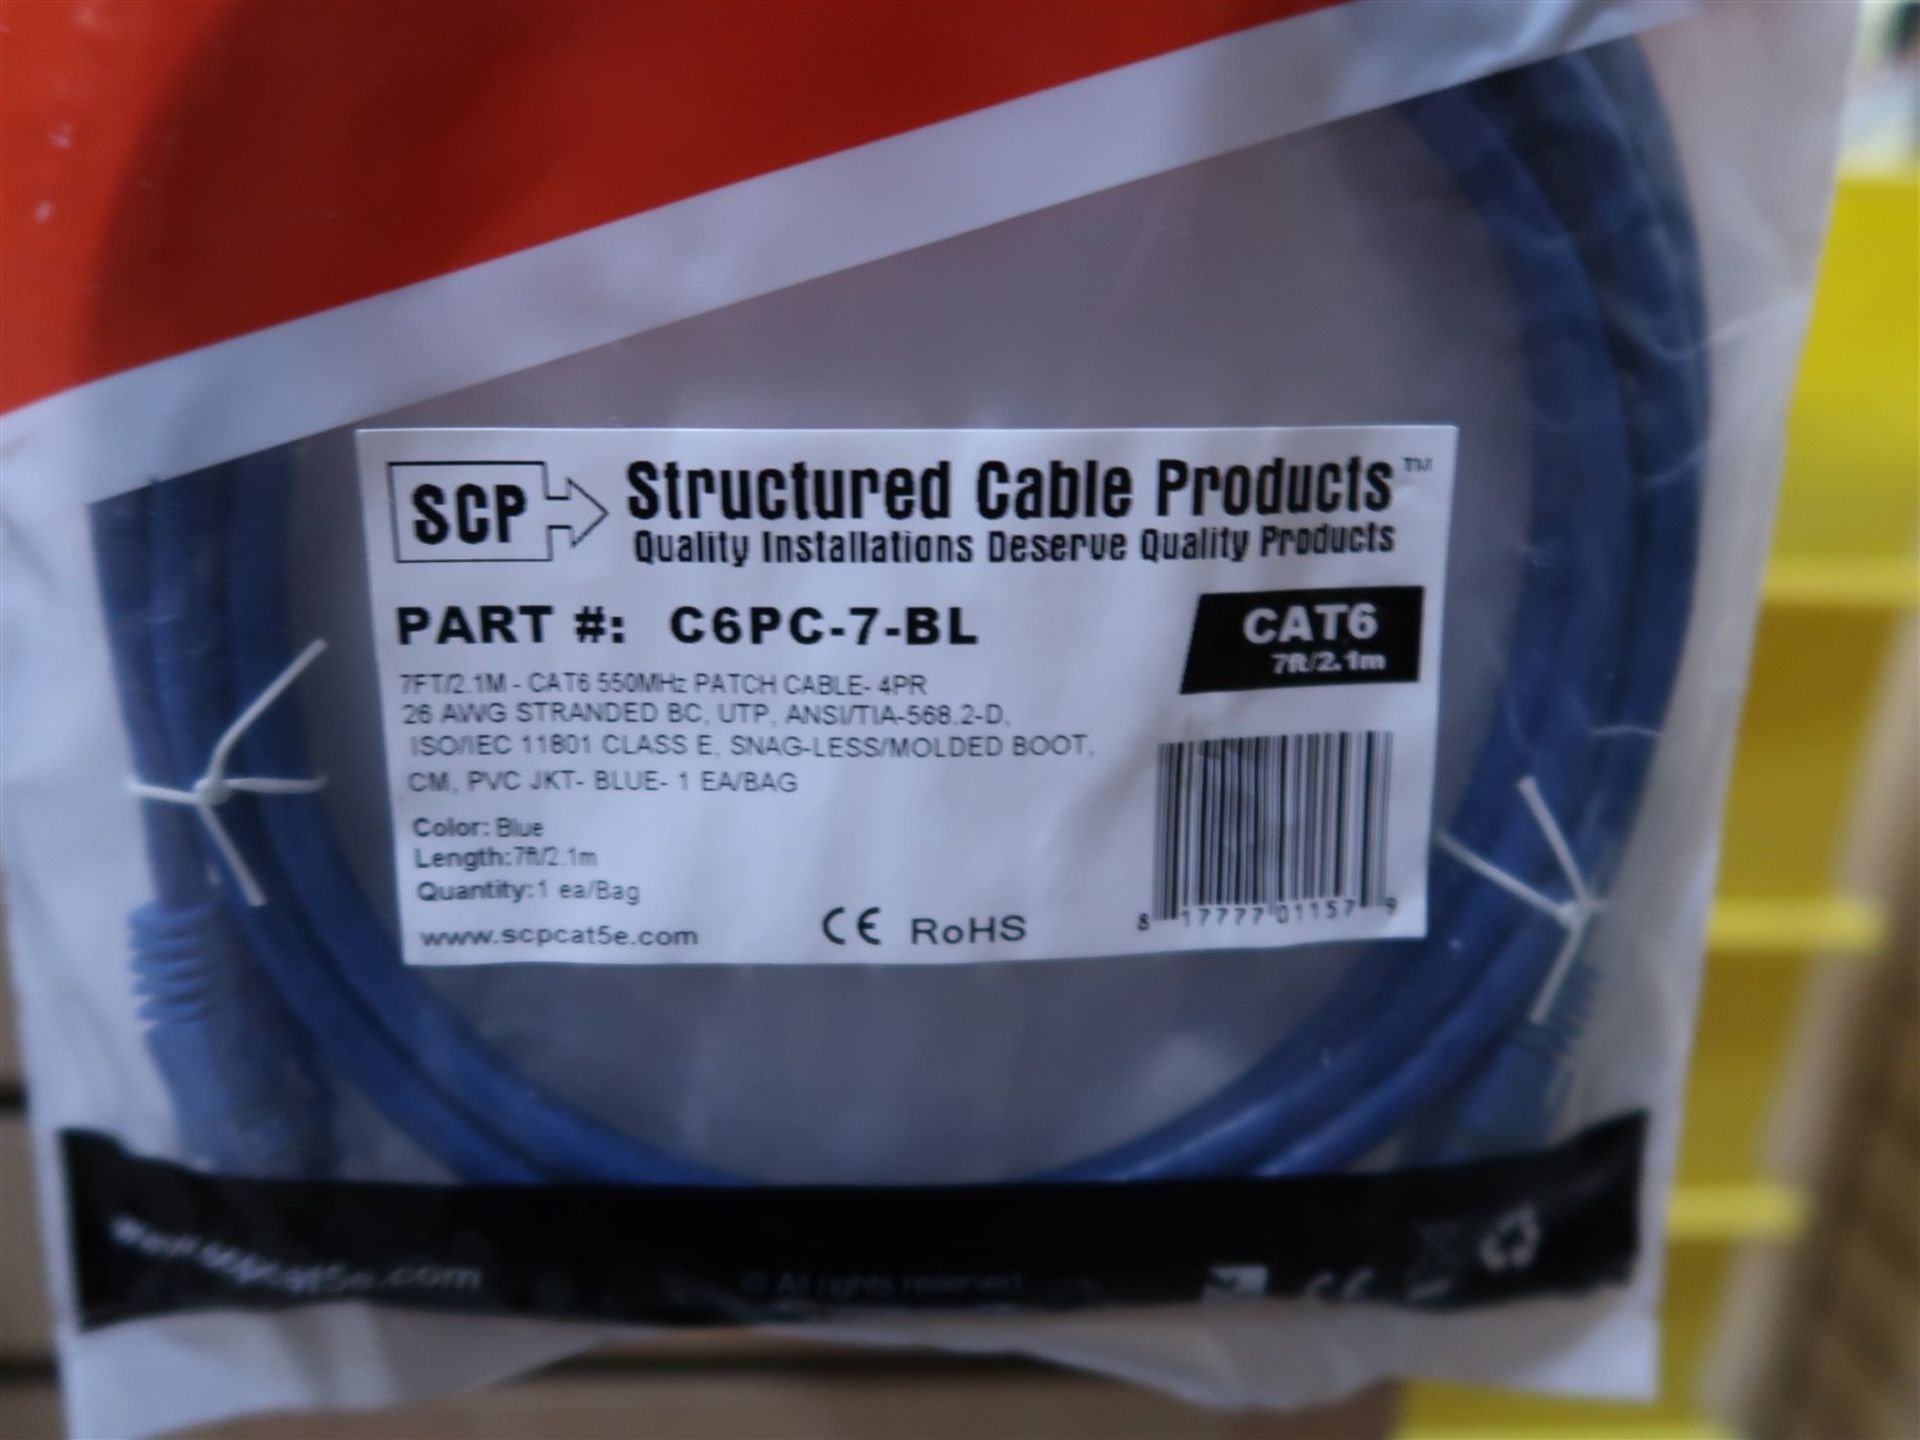 SCP C6PC-7-BL CAT 6 550 MHZ PATCH CABLE 9 FT. - Image 2 of 2